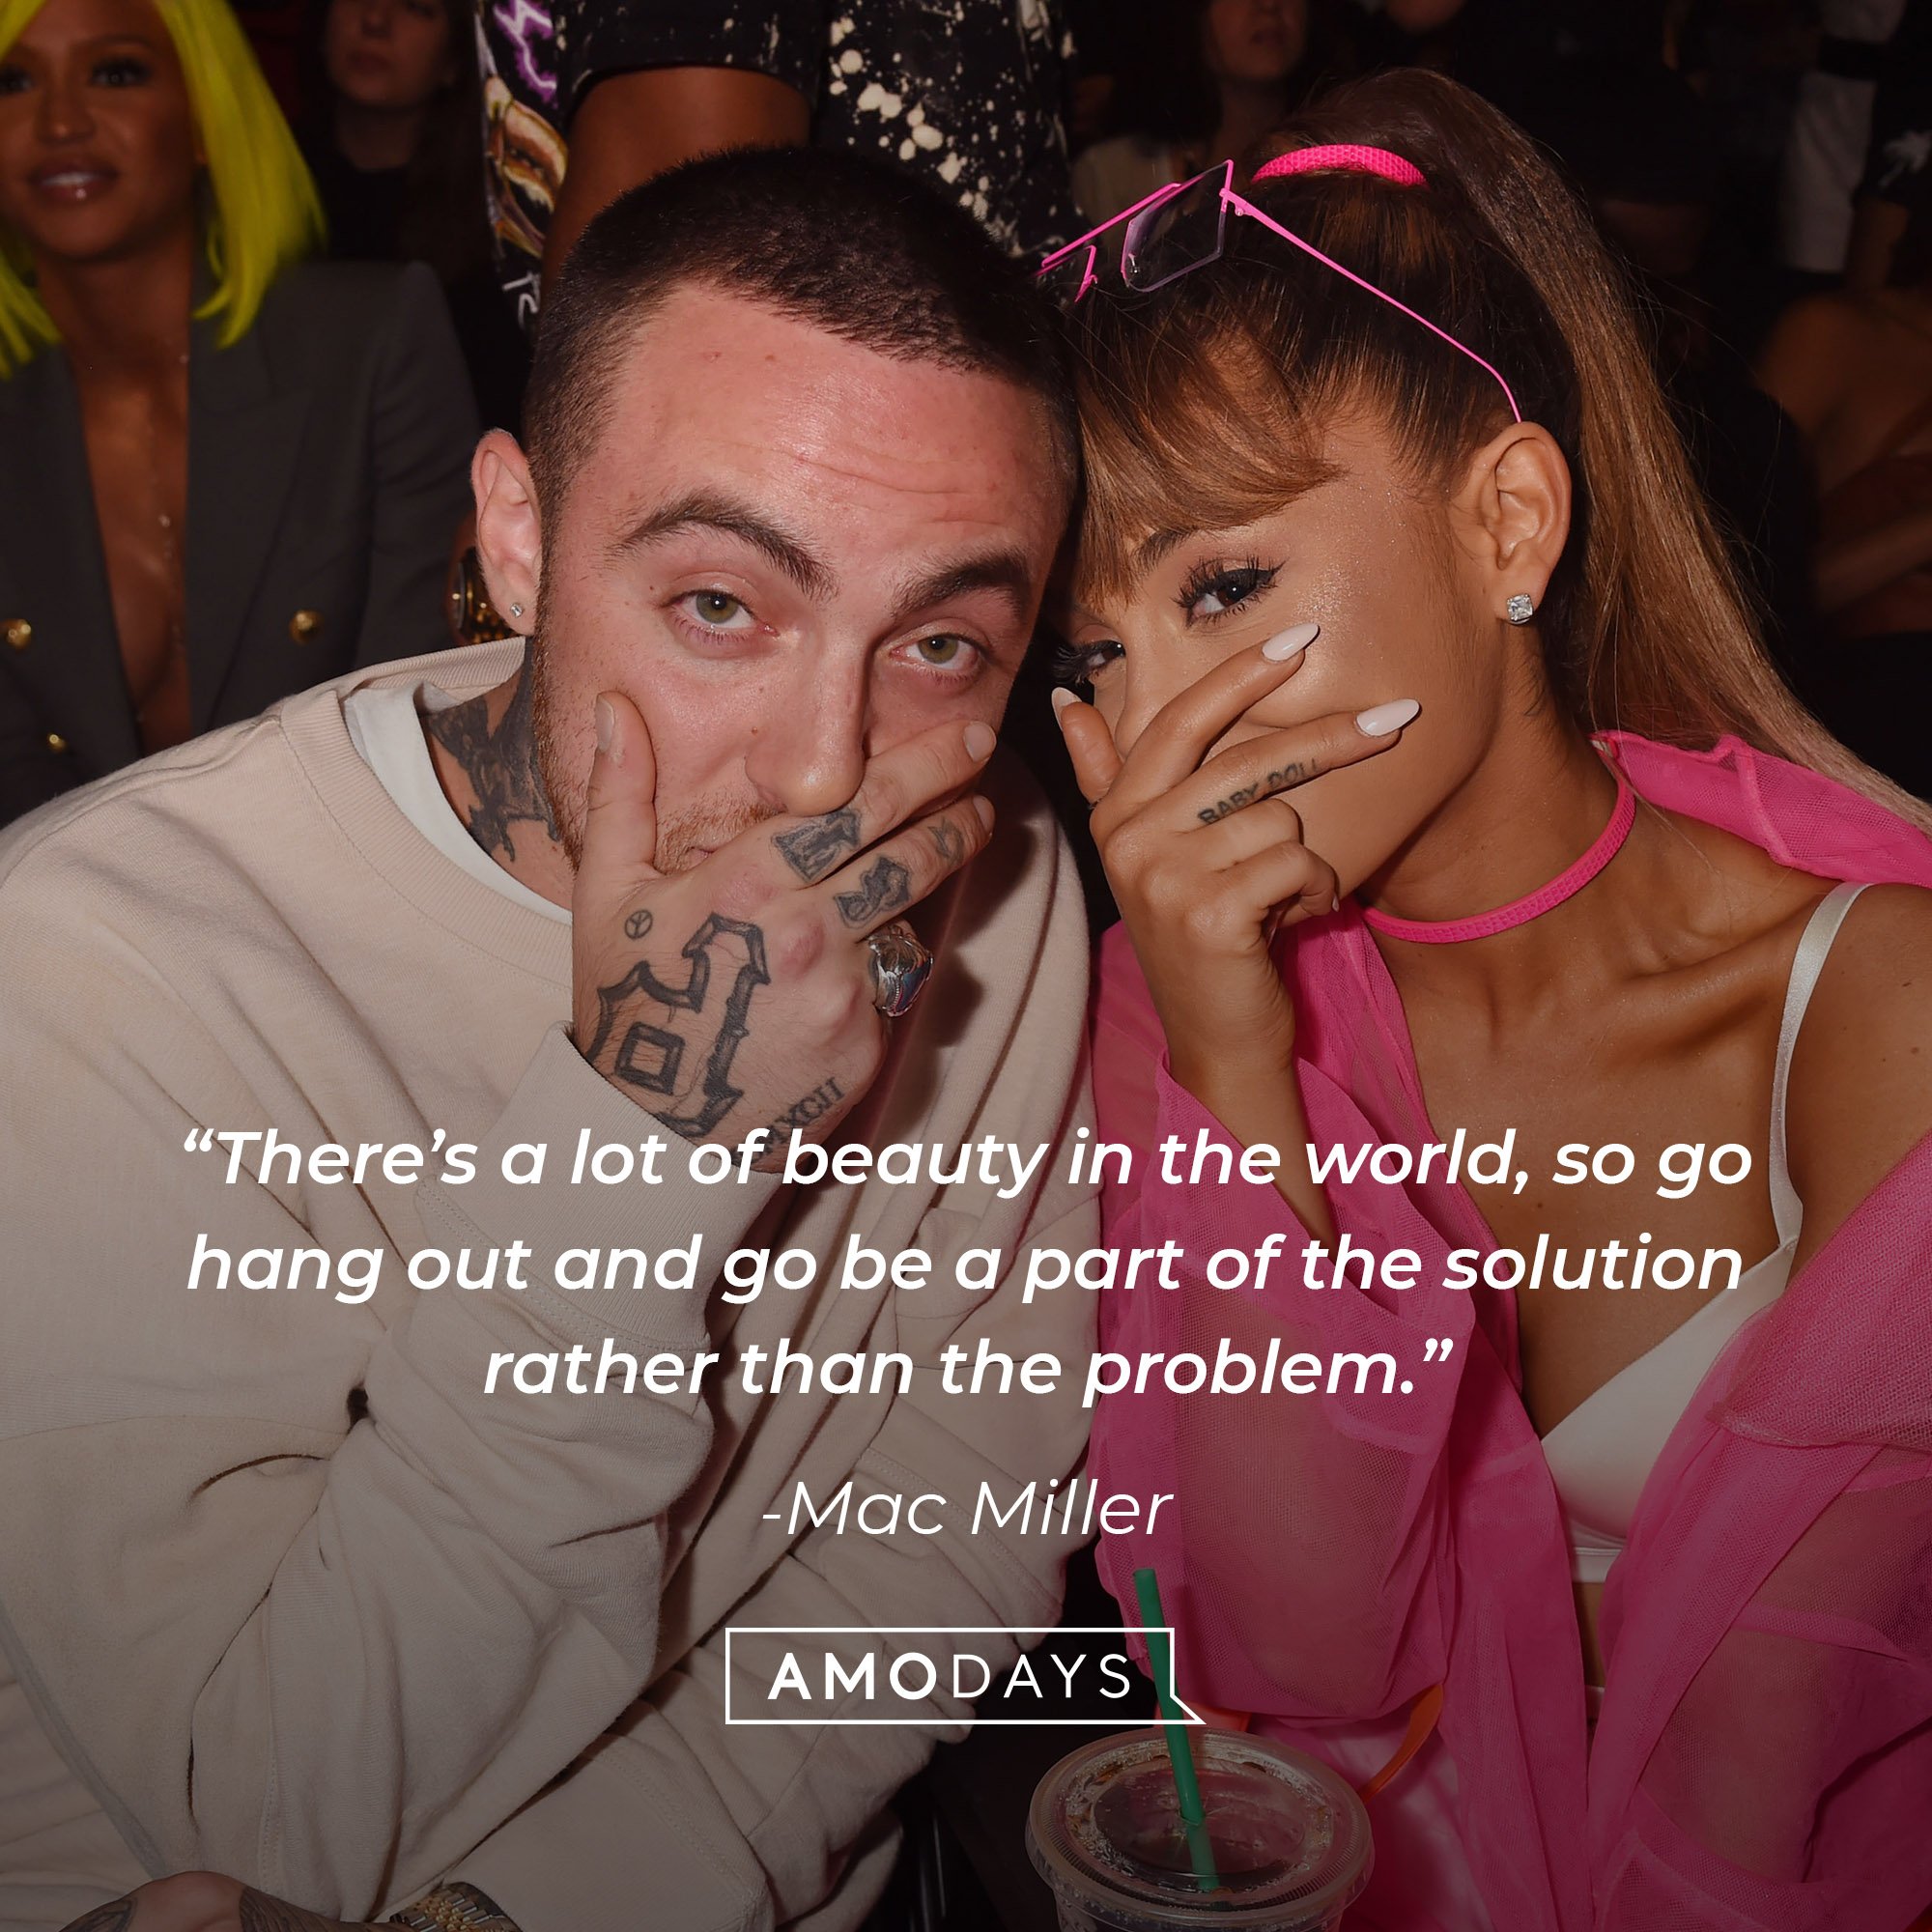   Mac Miller‘s quote: “There’s a lot of beauty in the world, so go hang out and go be a part of the solution rather than the problem.” │Image: AmoDays